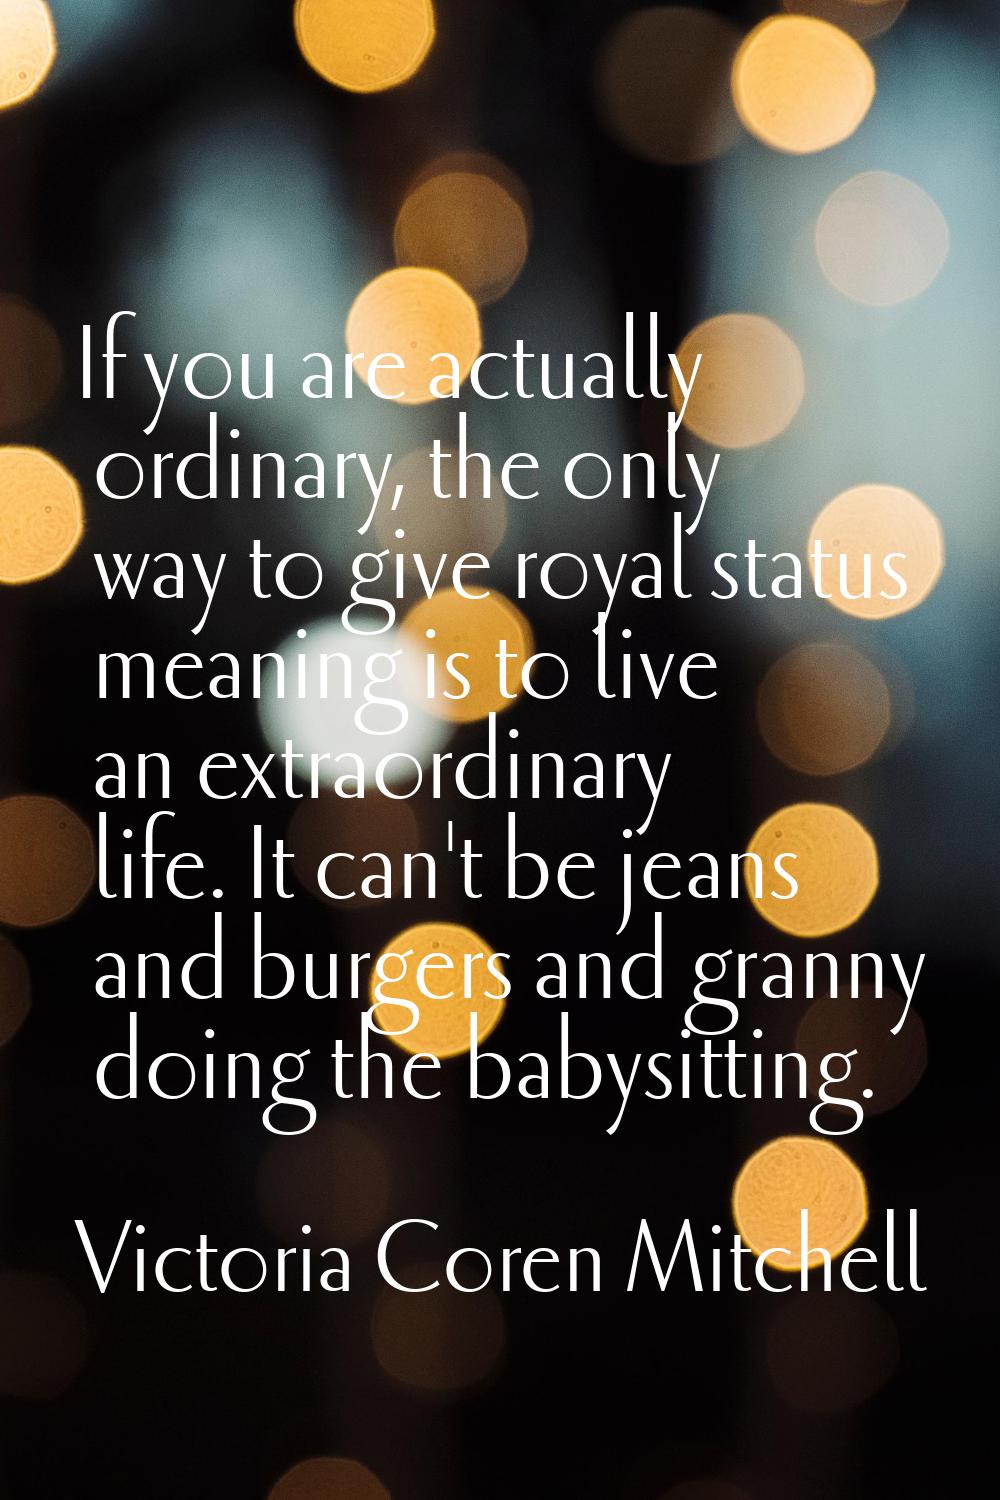 If you are actually ordinary, the only way to give royal status meaning is to live an extraordinary